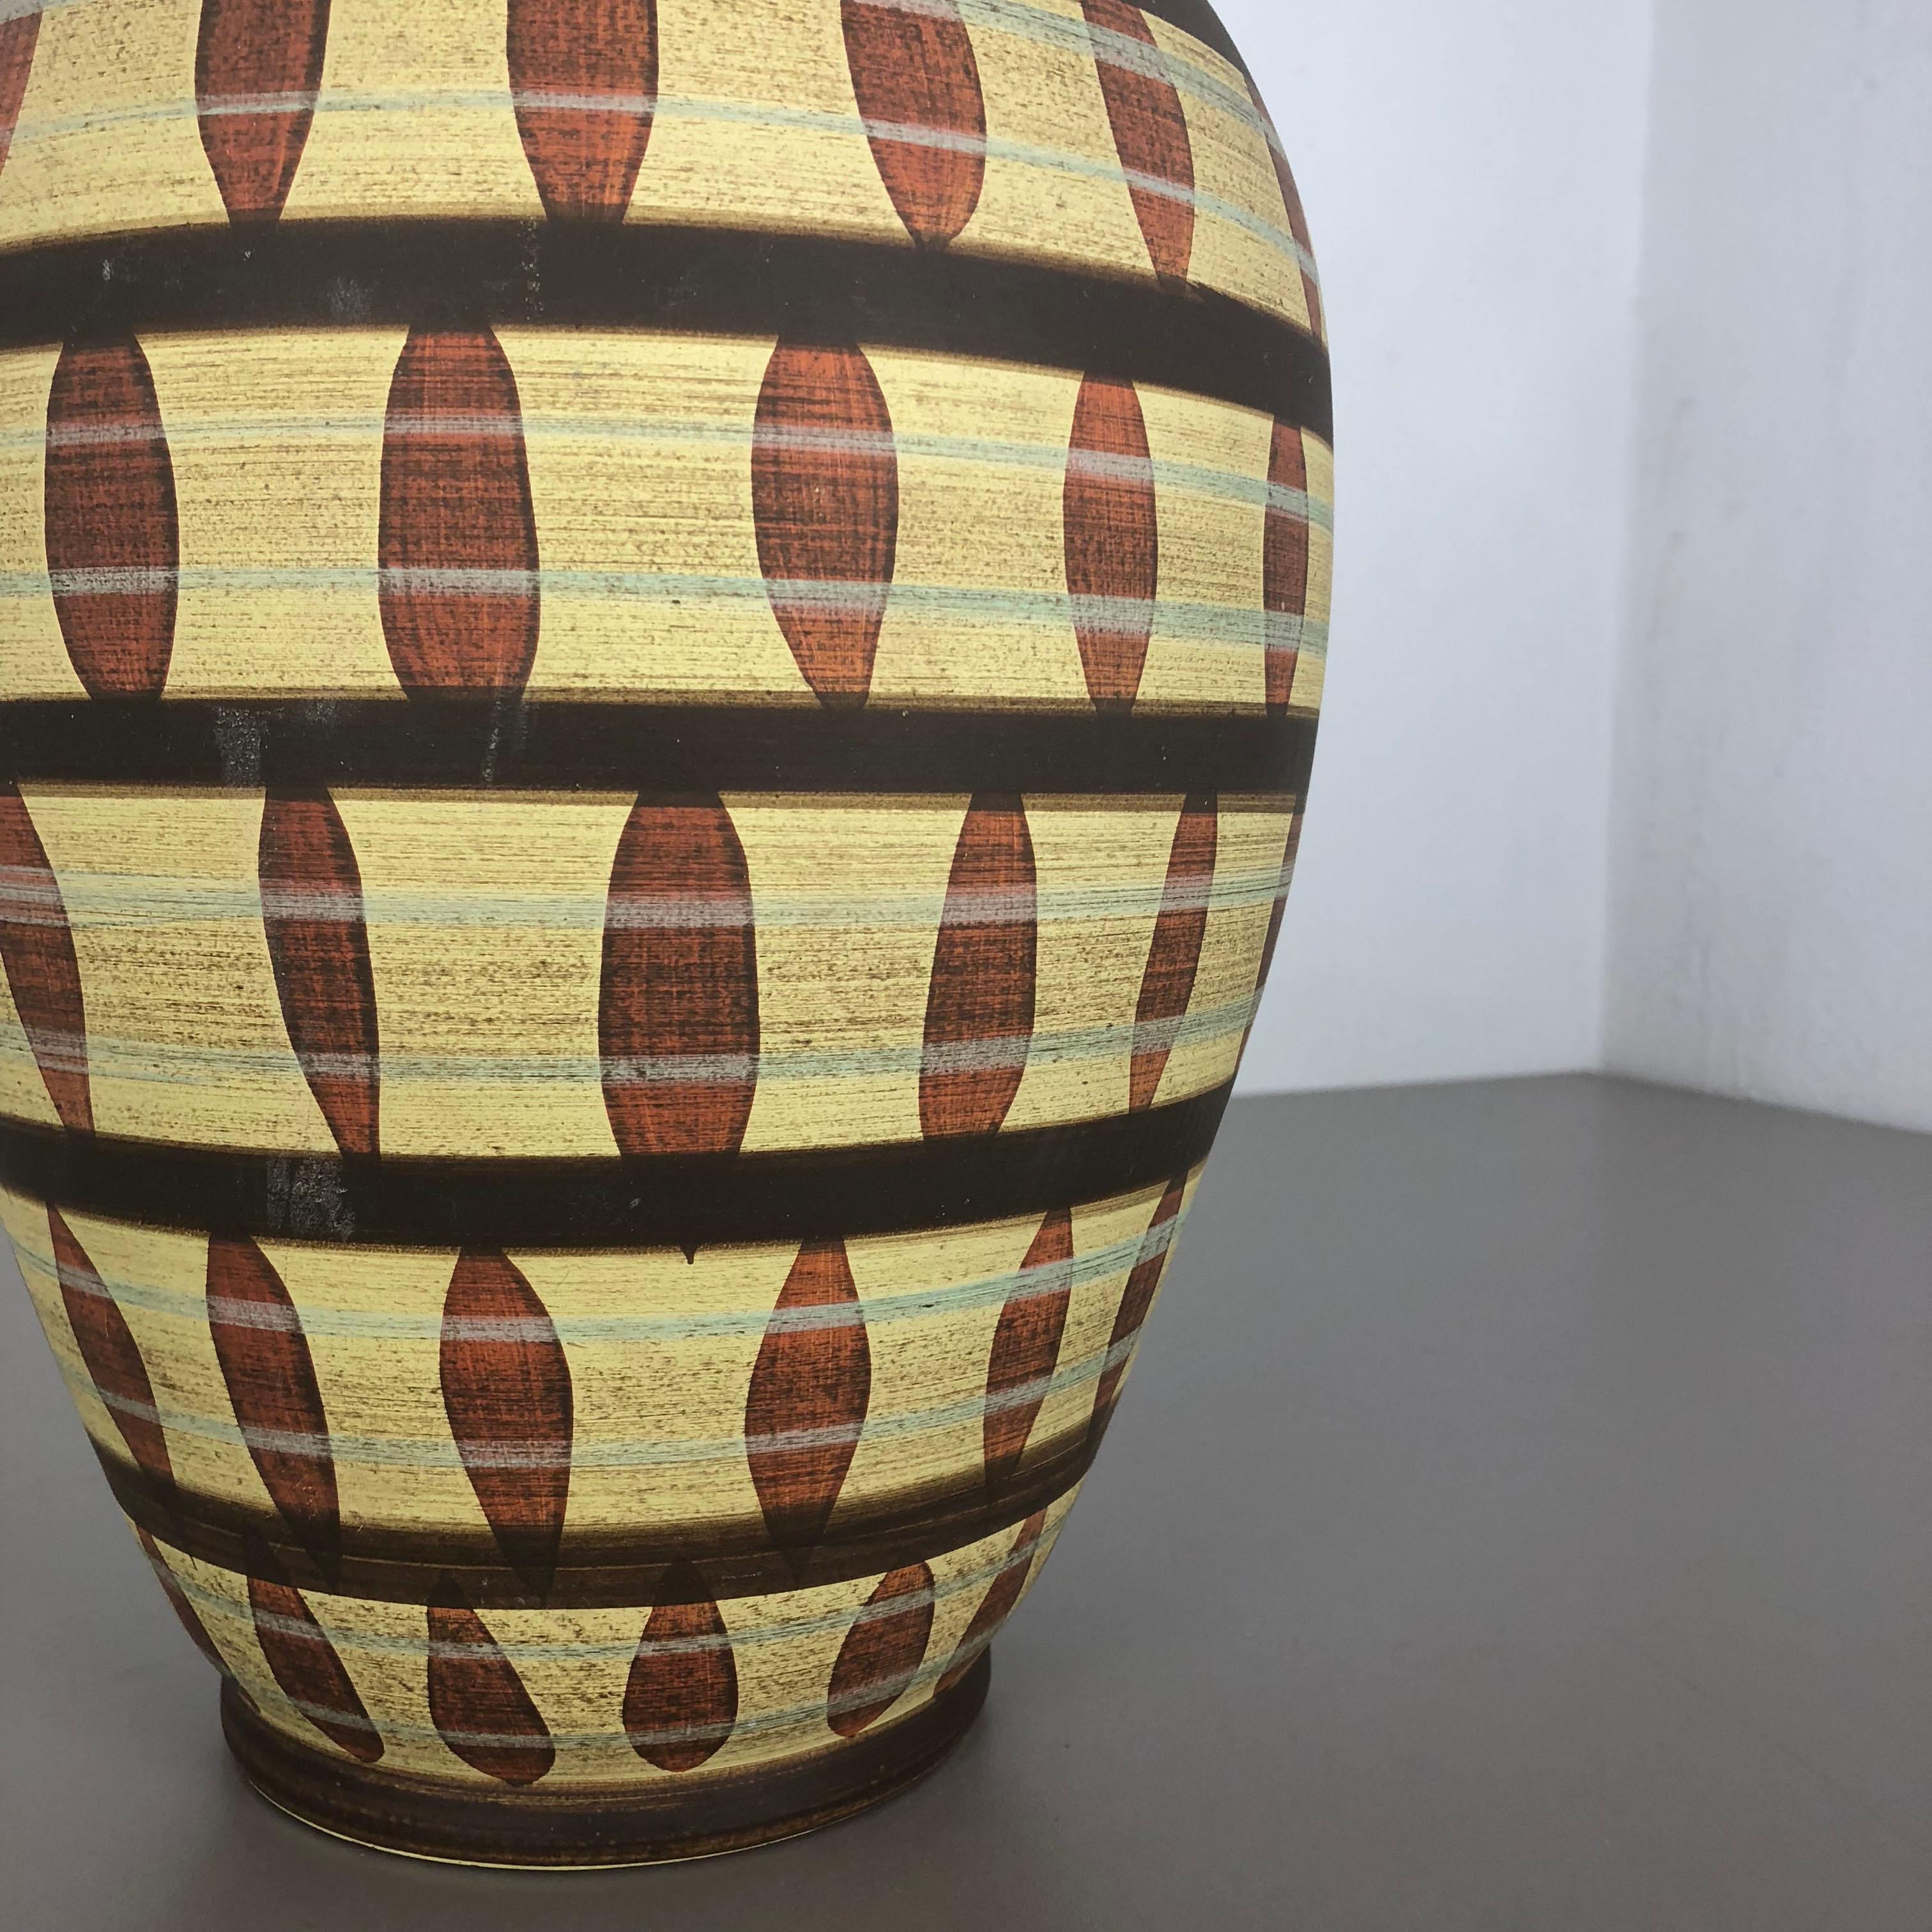 Vintage Abstract Ceramic Pottery Vase by Simon Peter Gerz, Germany, 1950s For Sale 5